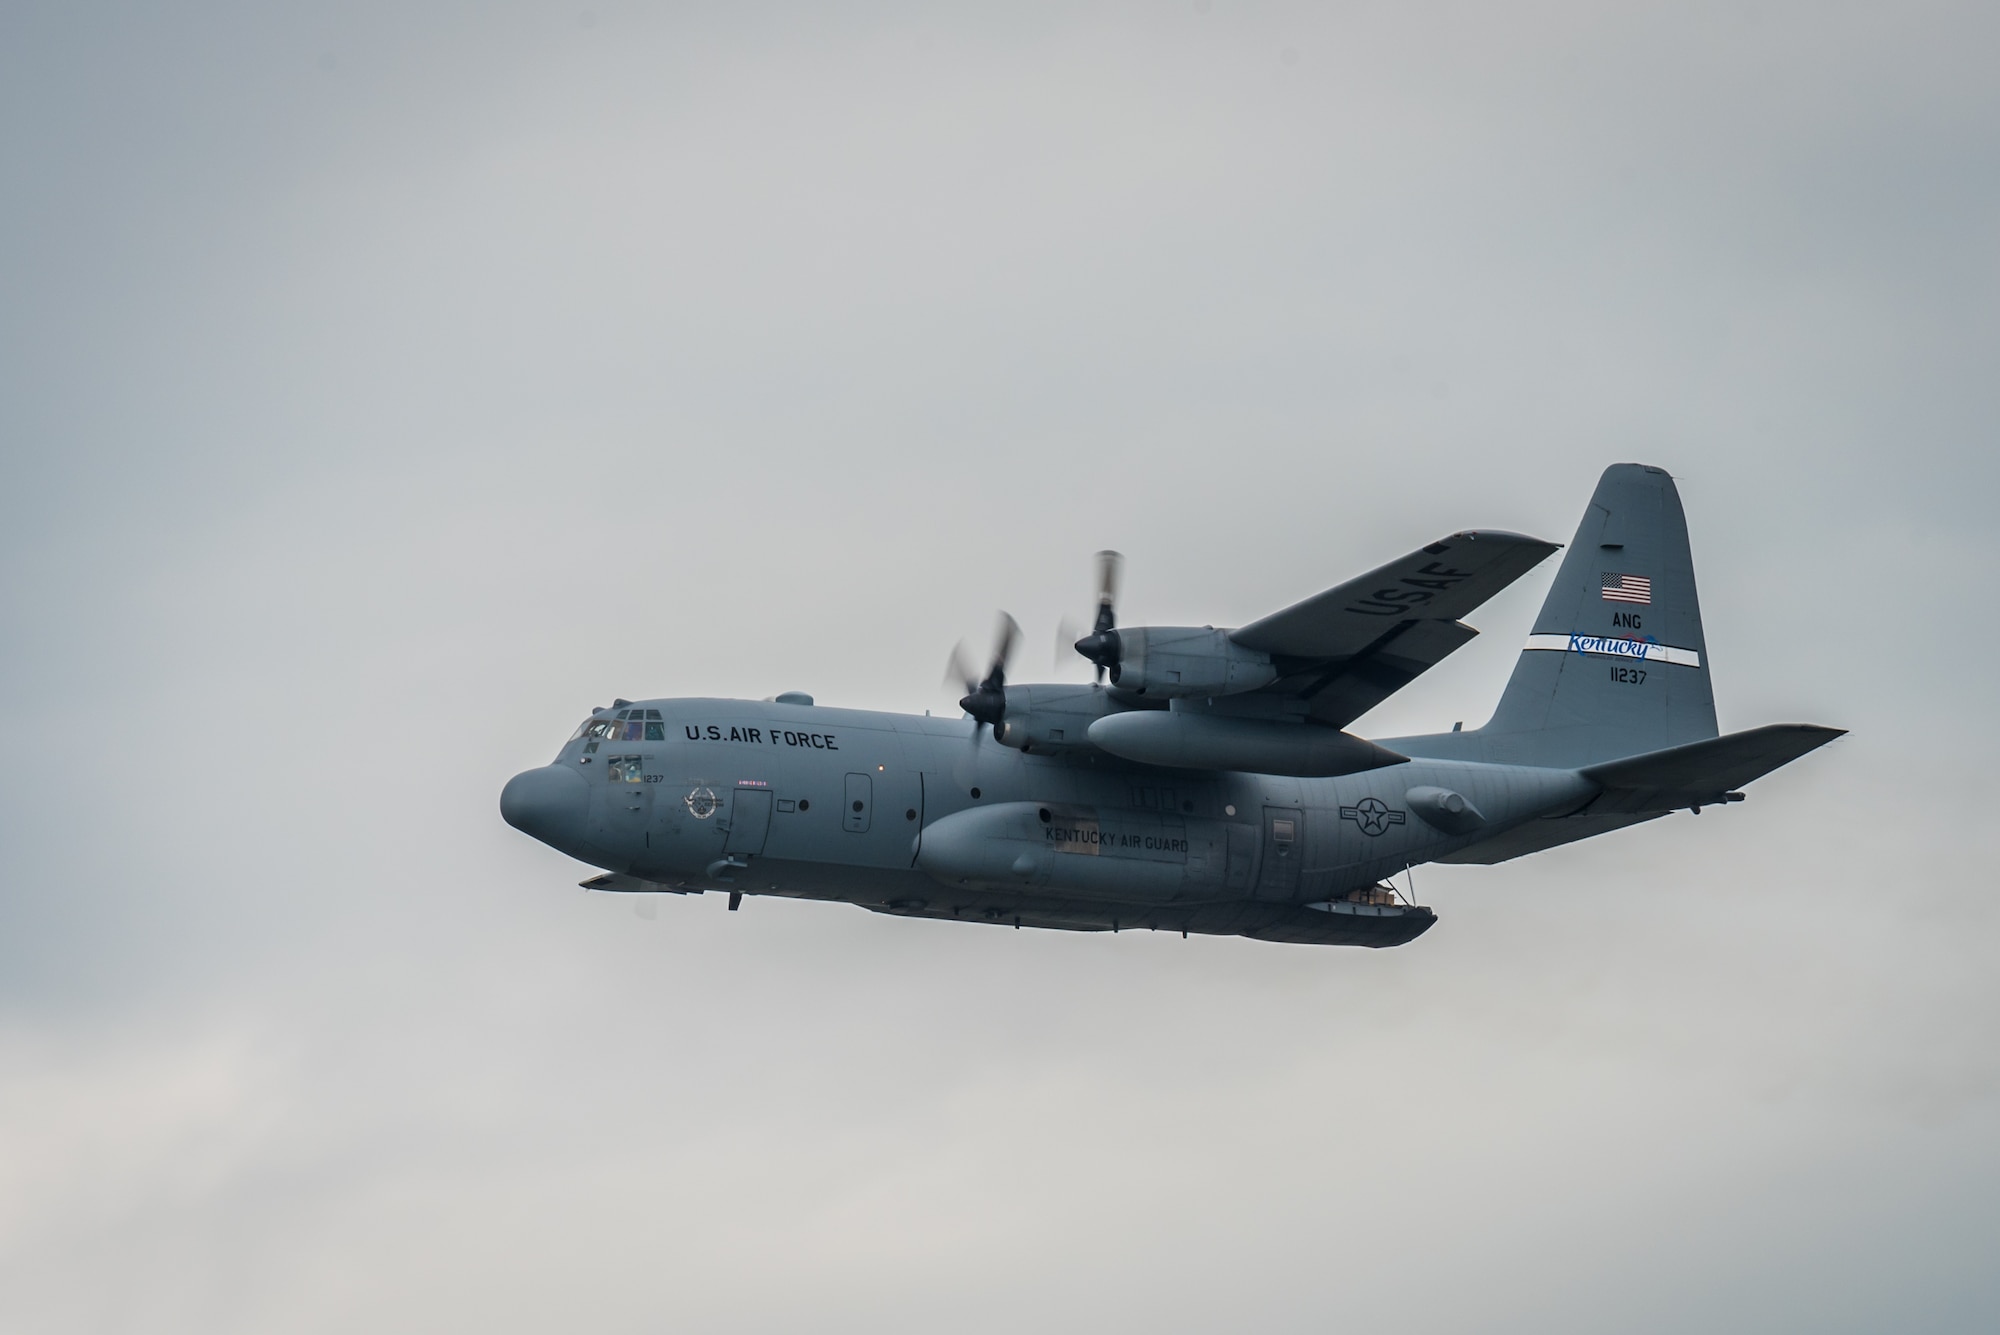 A C-130 Hercules aircraft from the Kentucky Air National Guard’s 123rd Airlift Wing prepares to air-drop two bundles of cargo in the Ohio River during the Thunder Over Louisville air show in Louisville, Ky., April 22, 2017. The annual event has grown to become the largest single-day air show in the nation. (U.S. Air National Guard photo by Lt. Col. Dale Greer)